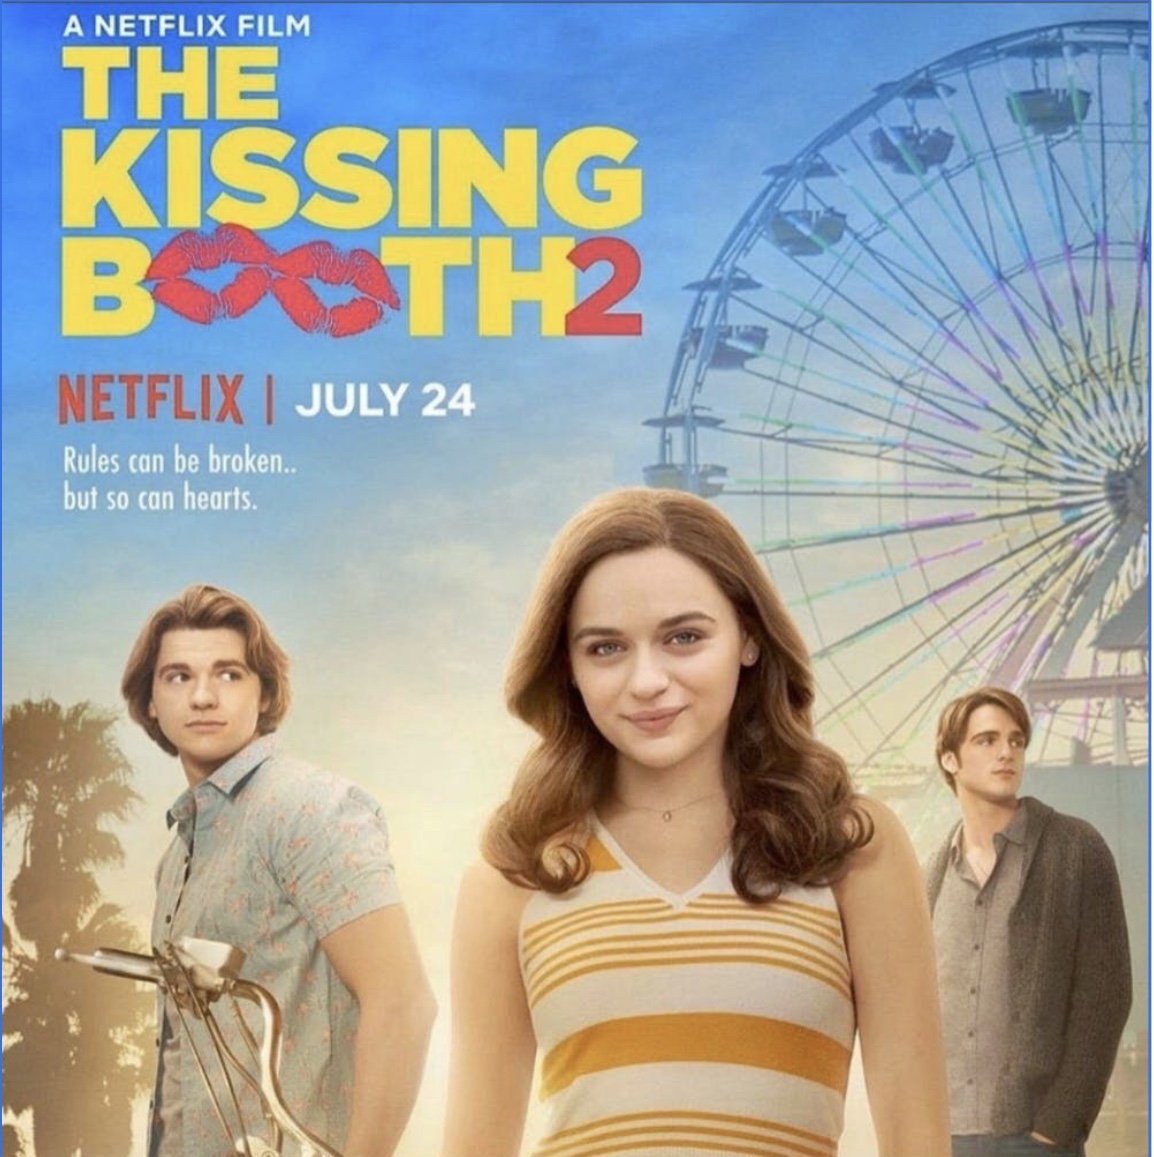 videos are stored in .tex files too, but it's a different format and I don't know how to decode it yet.they're "kb2" files from the header, but googling "kb2 movie" gives me a teen comedy called The Kissing Booth 2